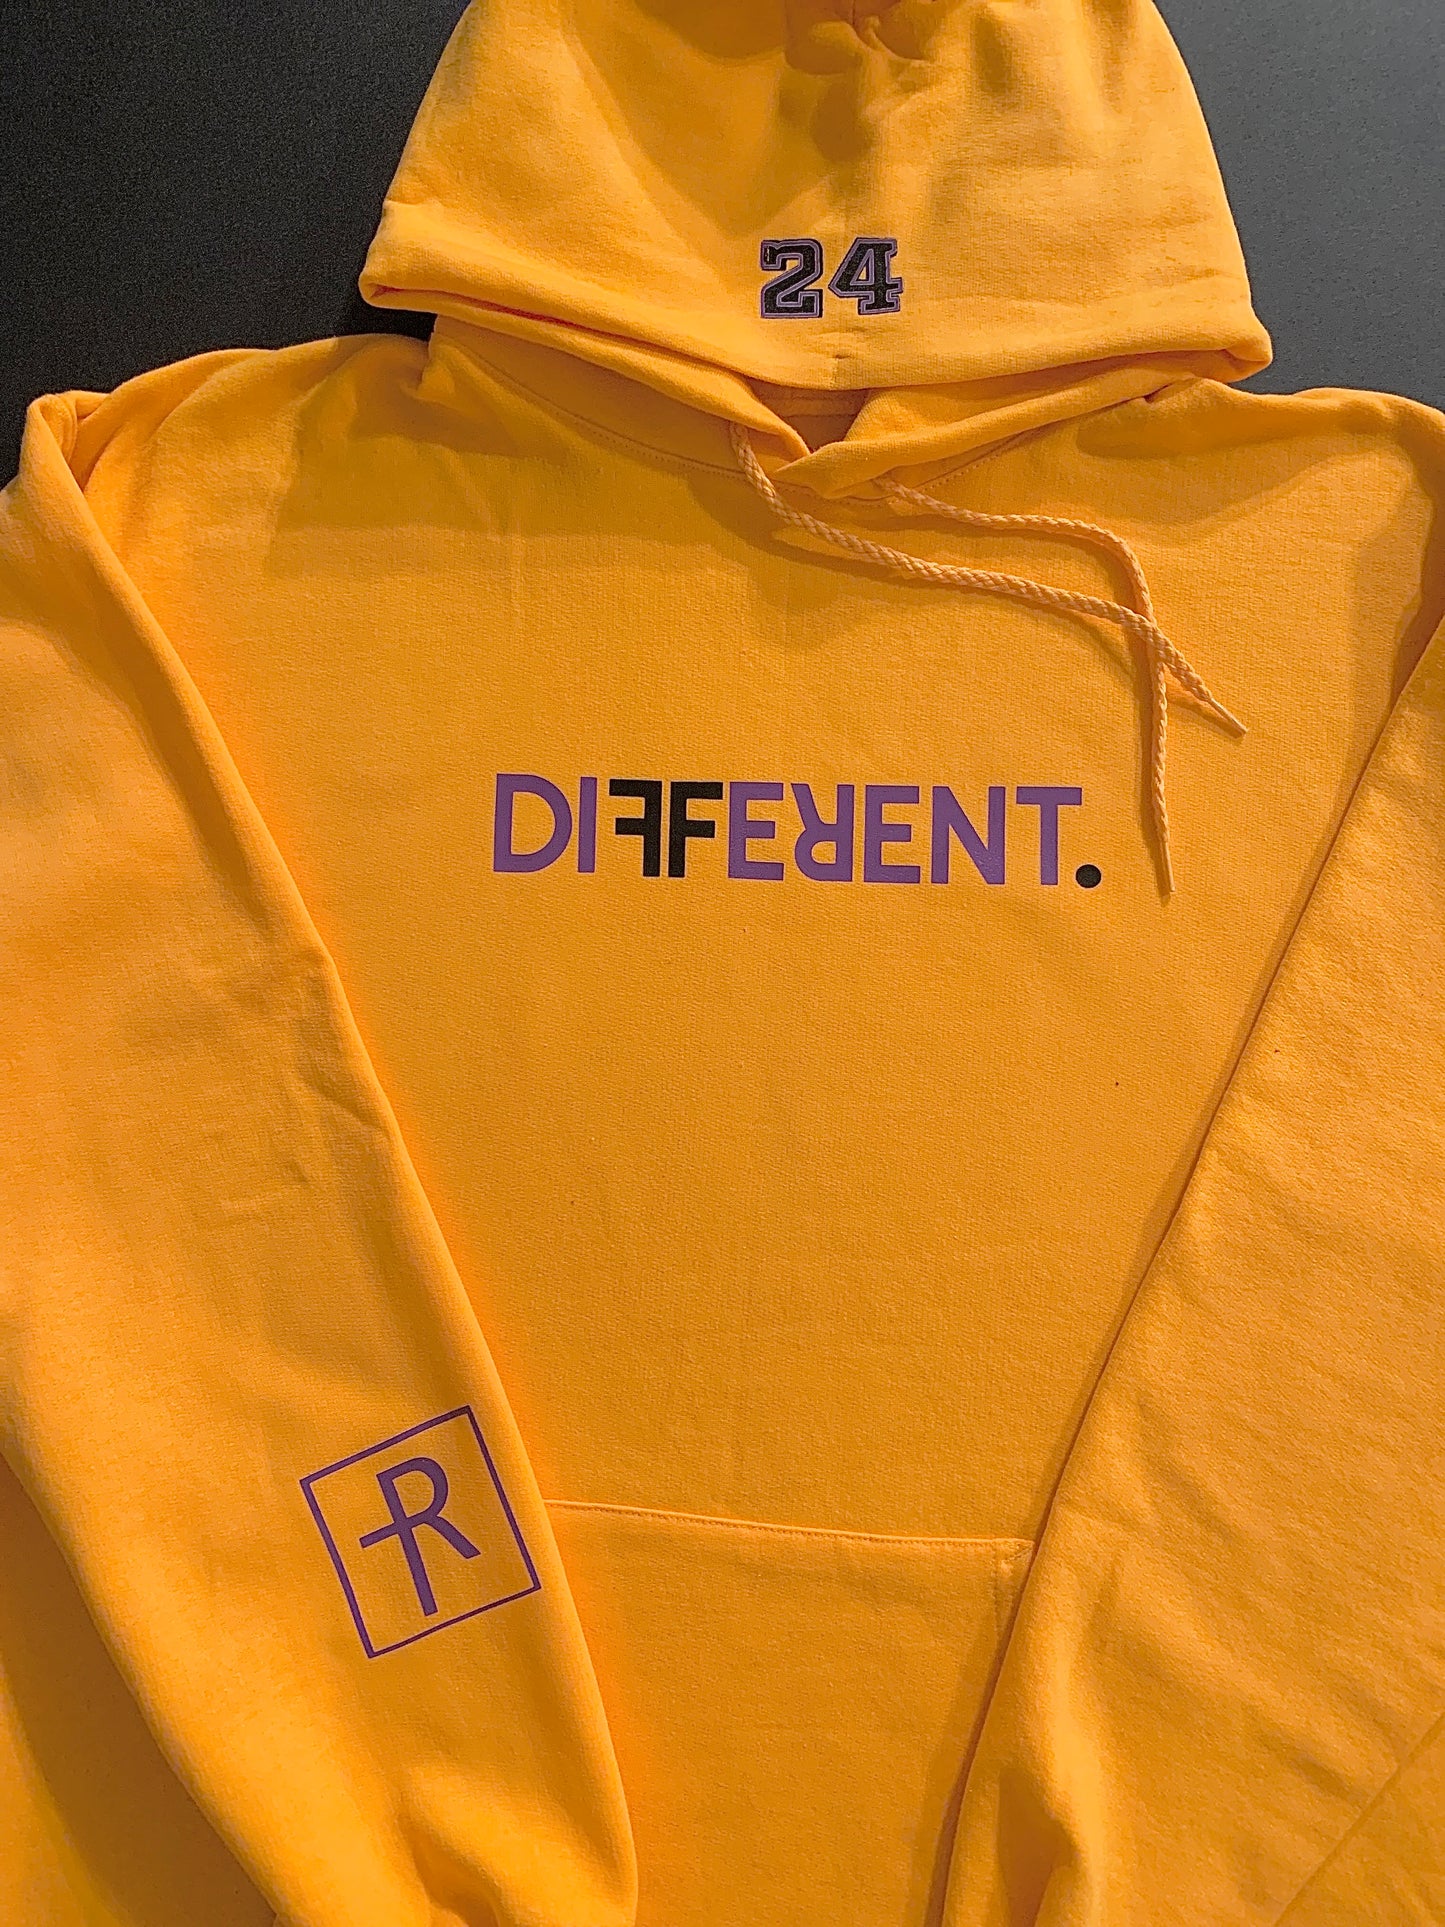 Gold With Purple And Black Kobe “Different” Hoody